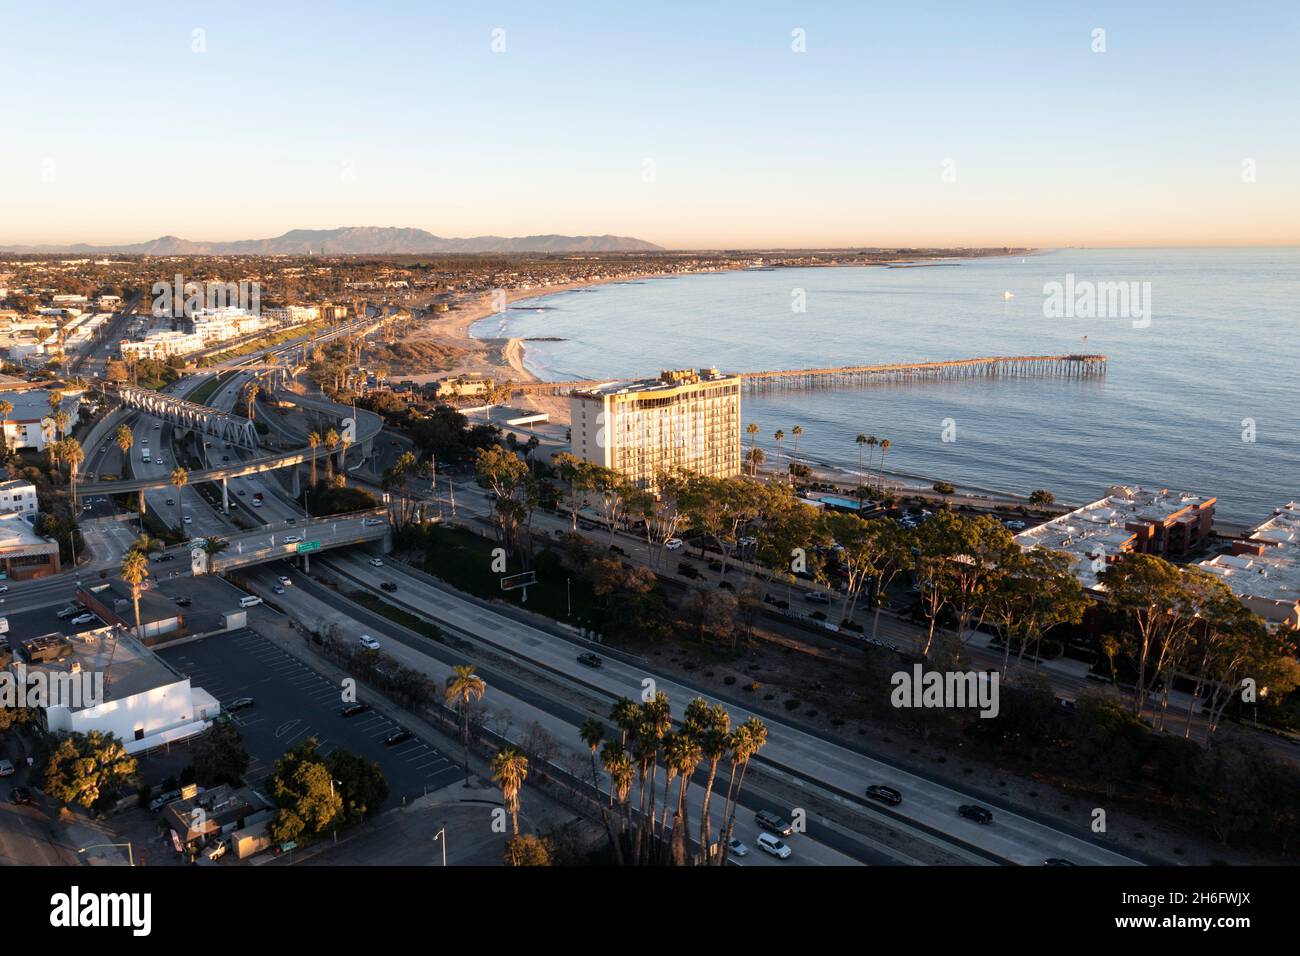 Aerial view of the Ventura, California waterfront and pier Stock Photo